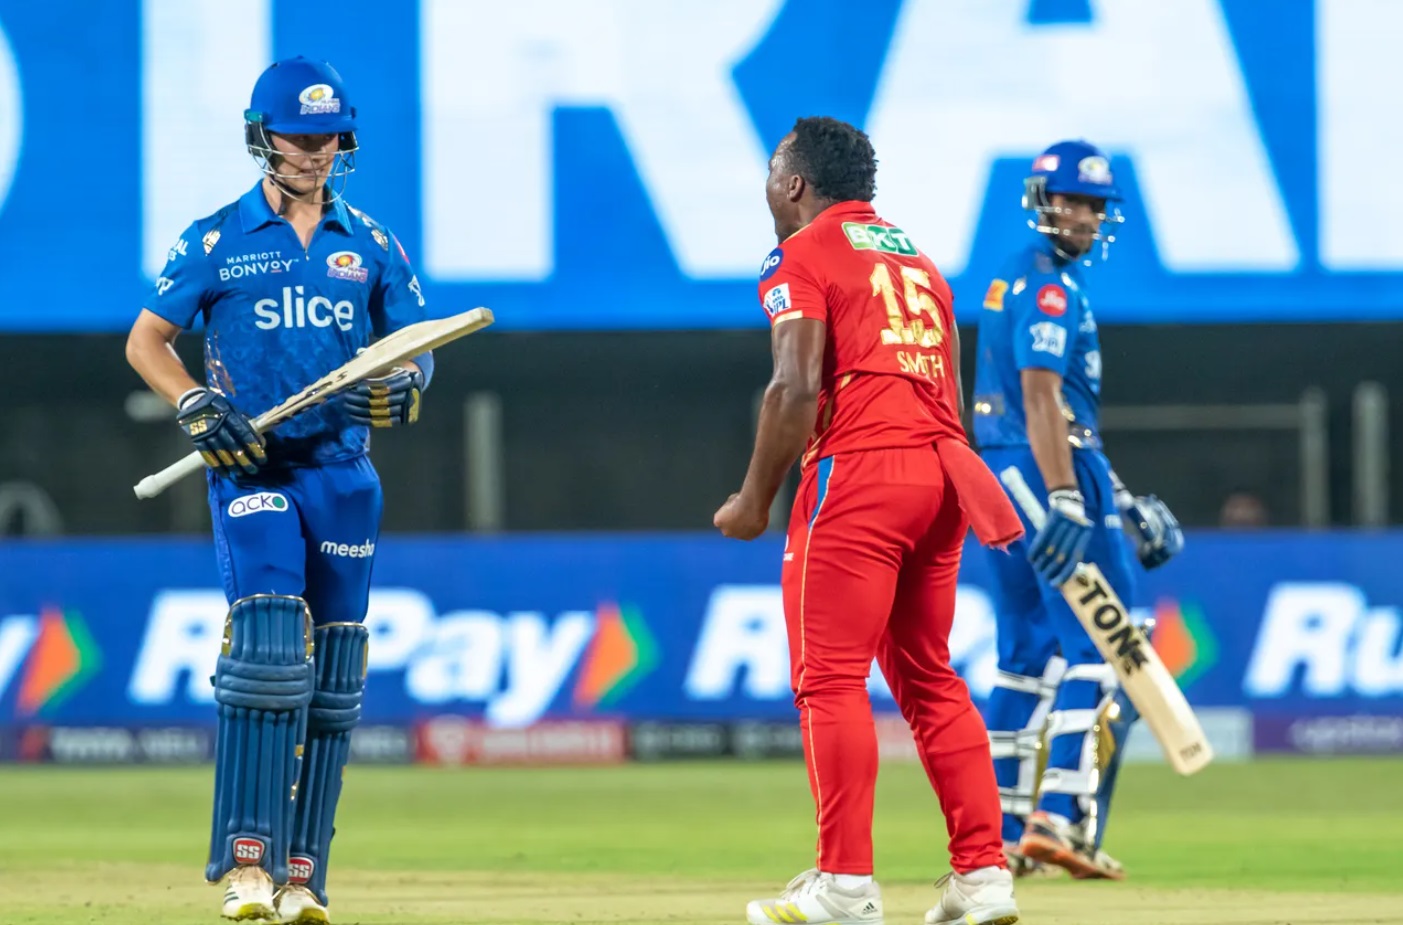 IPL 2022, MI vs PBKS | Twitter reacts to Odean Smith giving angry sendoff to 'Baby AB' Dewald Brevis